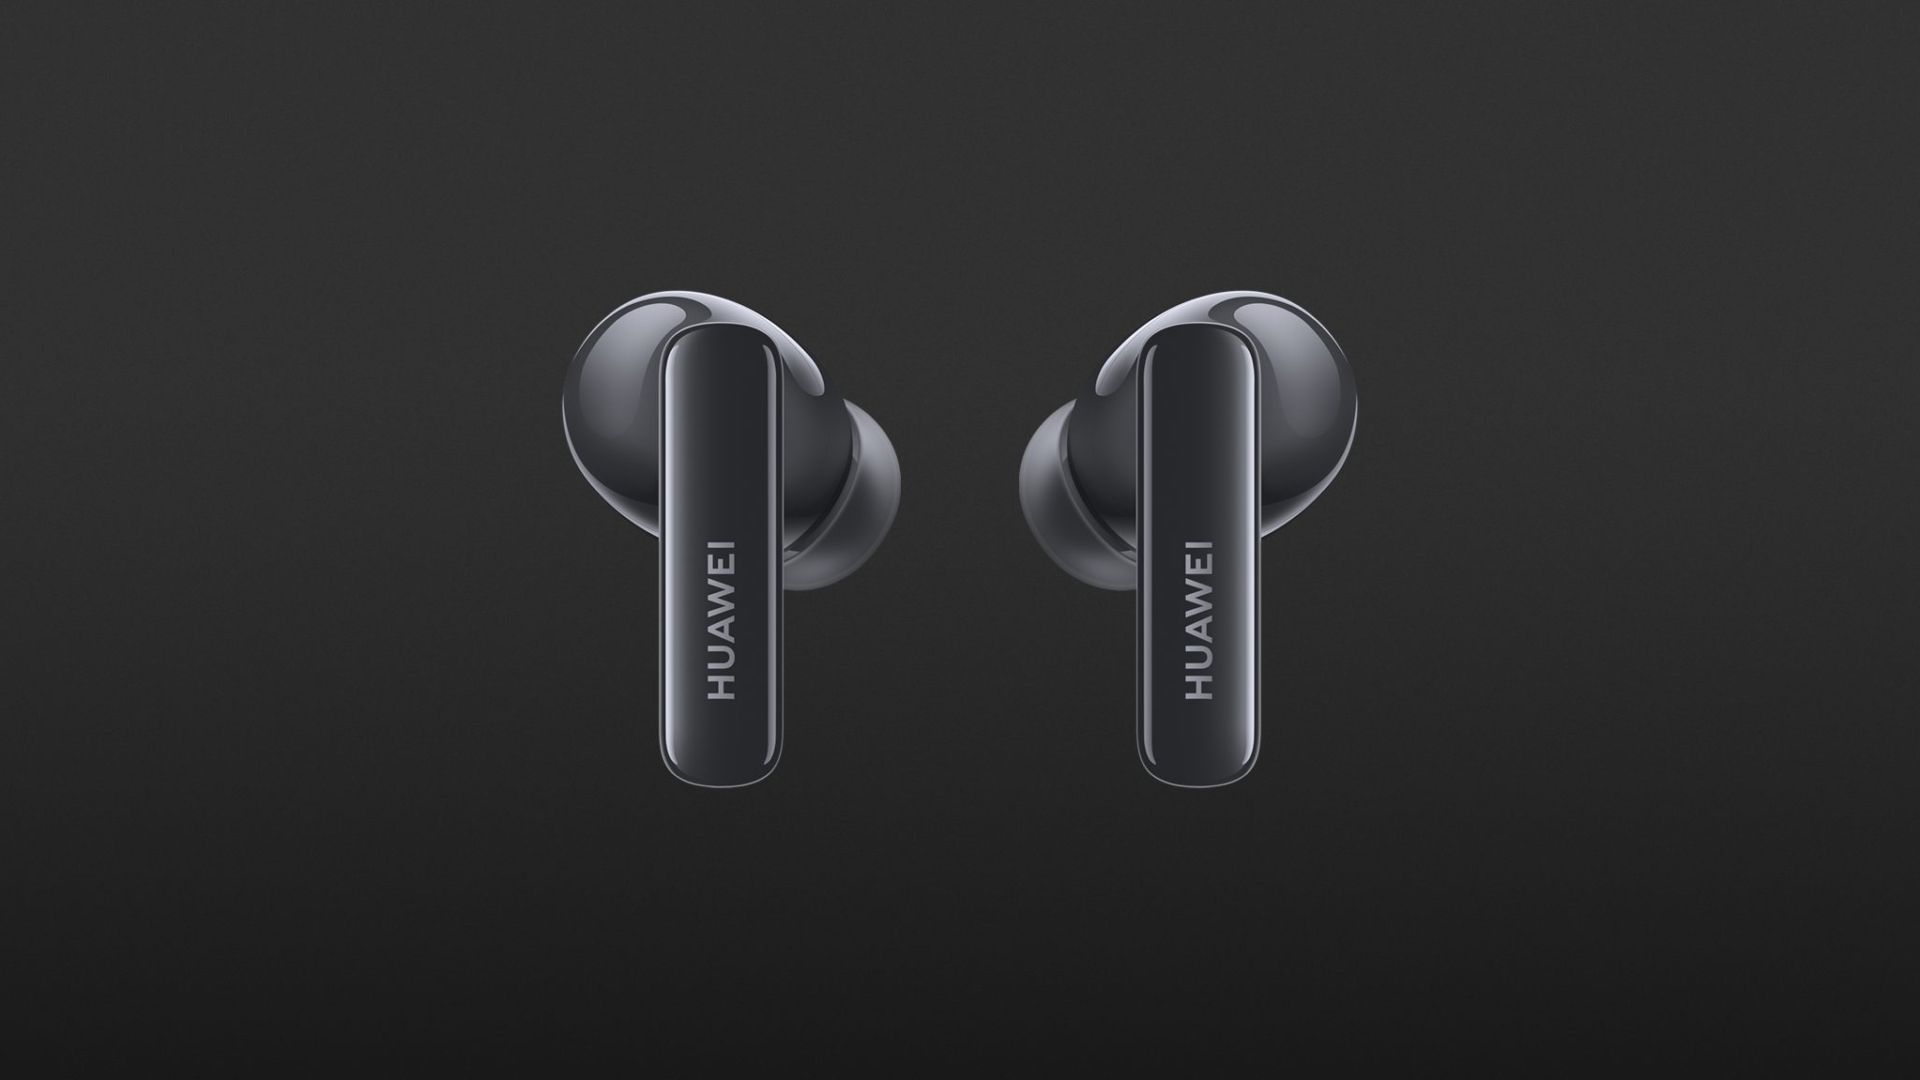 New HUAWEI FreeBuds 5i Wireless Headphone Dynamic Unit ANC Active Noise  Cancellation 42dB Hi-Res high-resolution sound quality